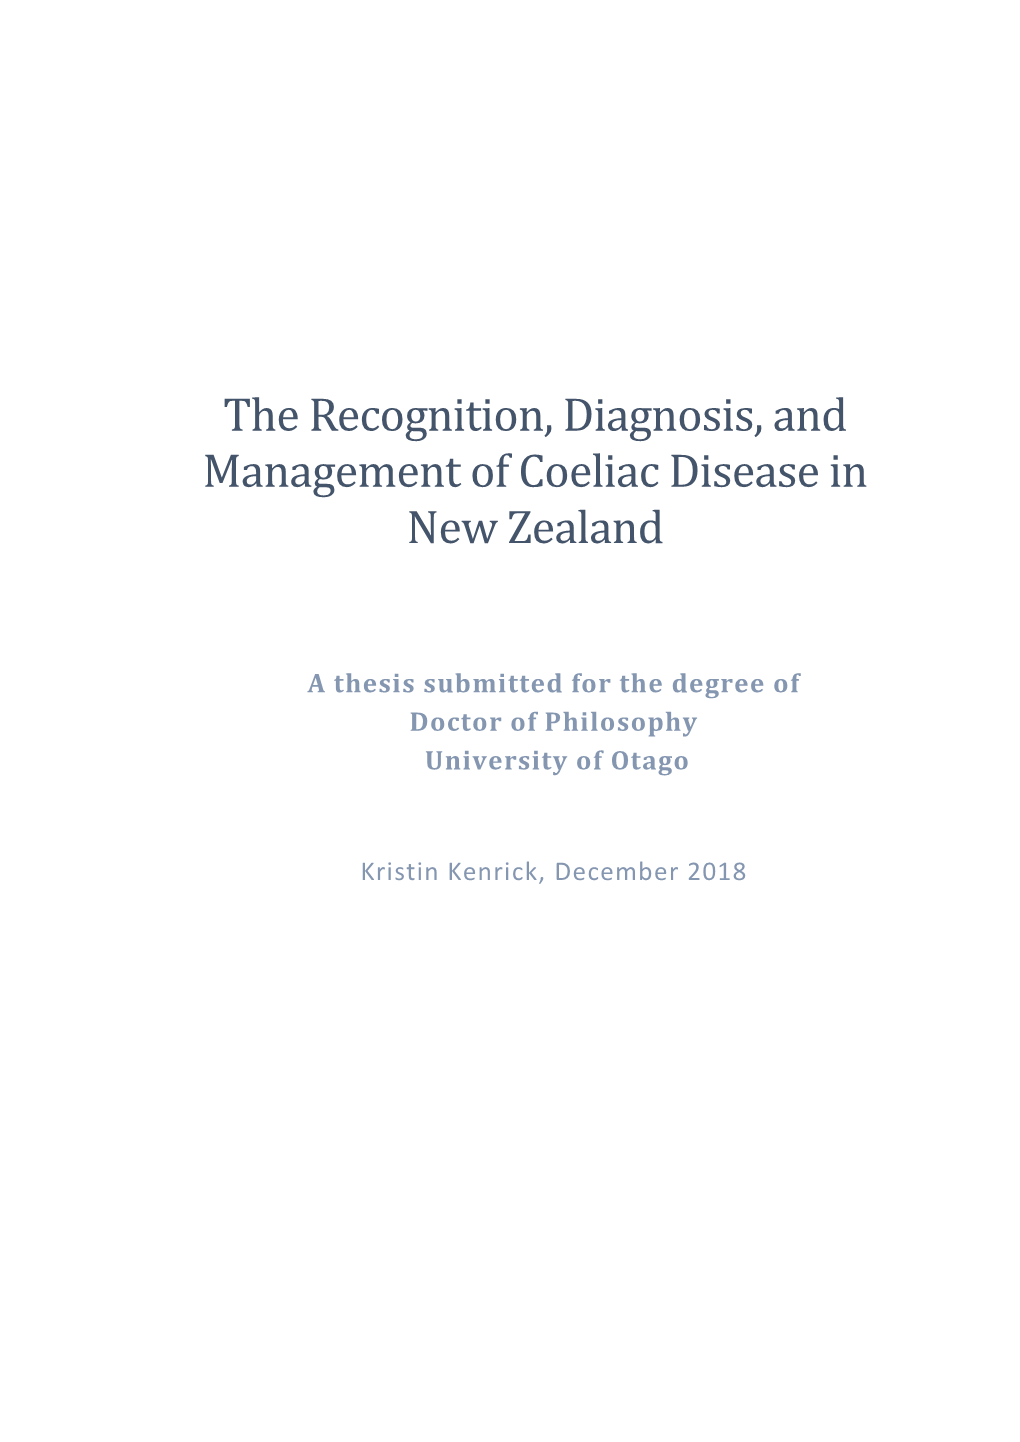 The Recognition, Diagnosis, and Management of Coeliac Disease in New Zealand